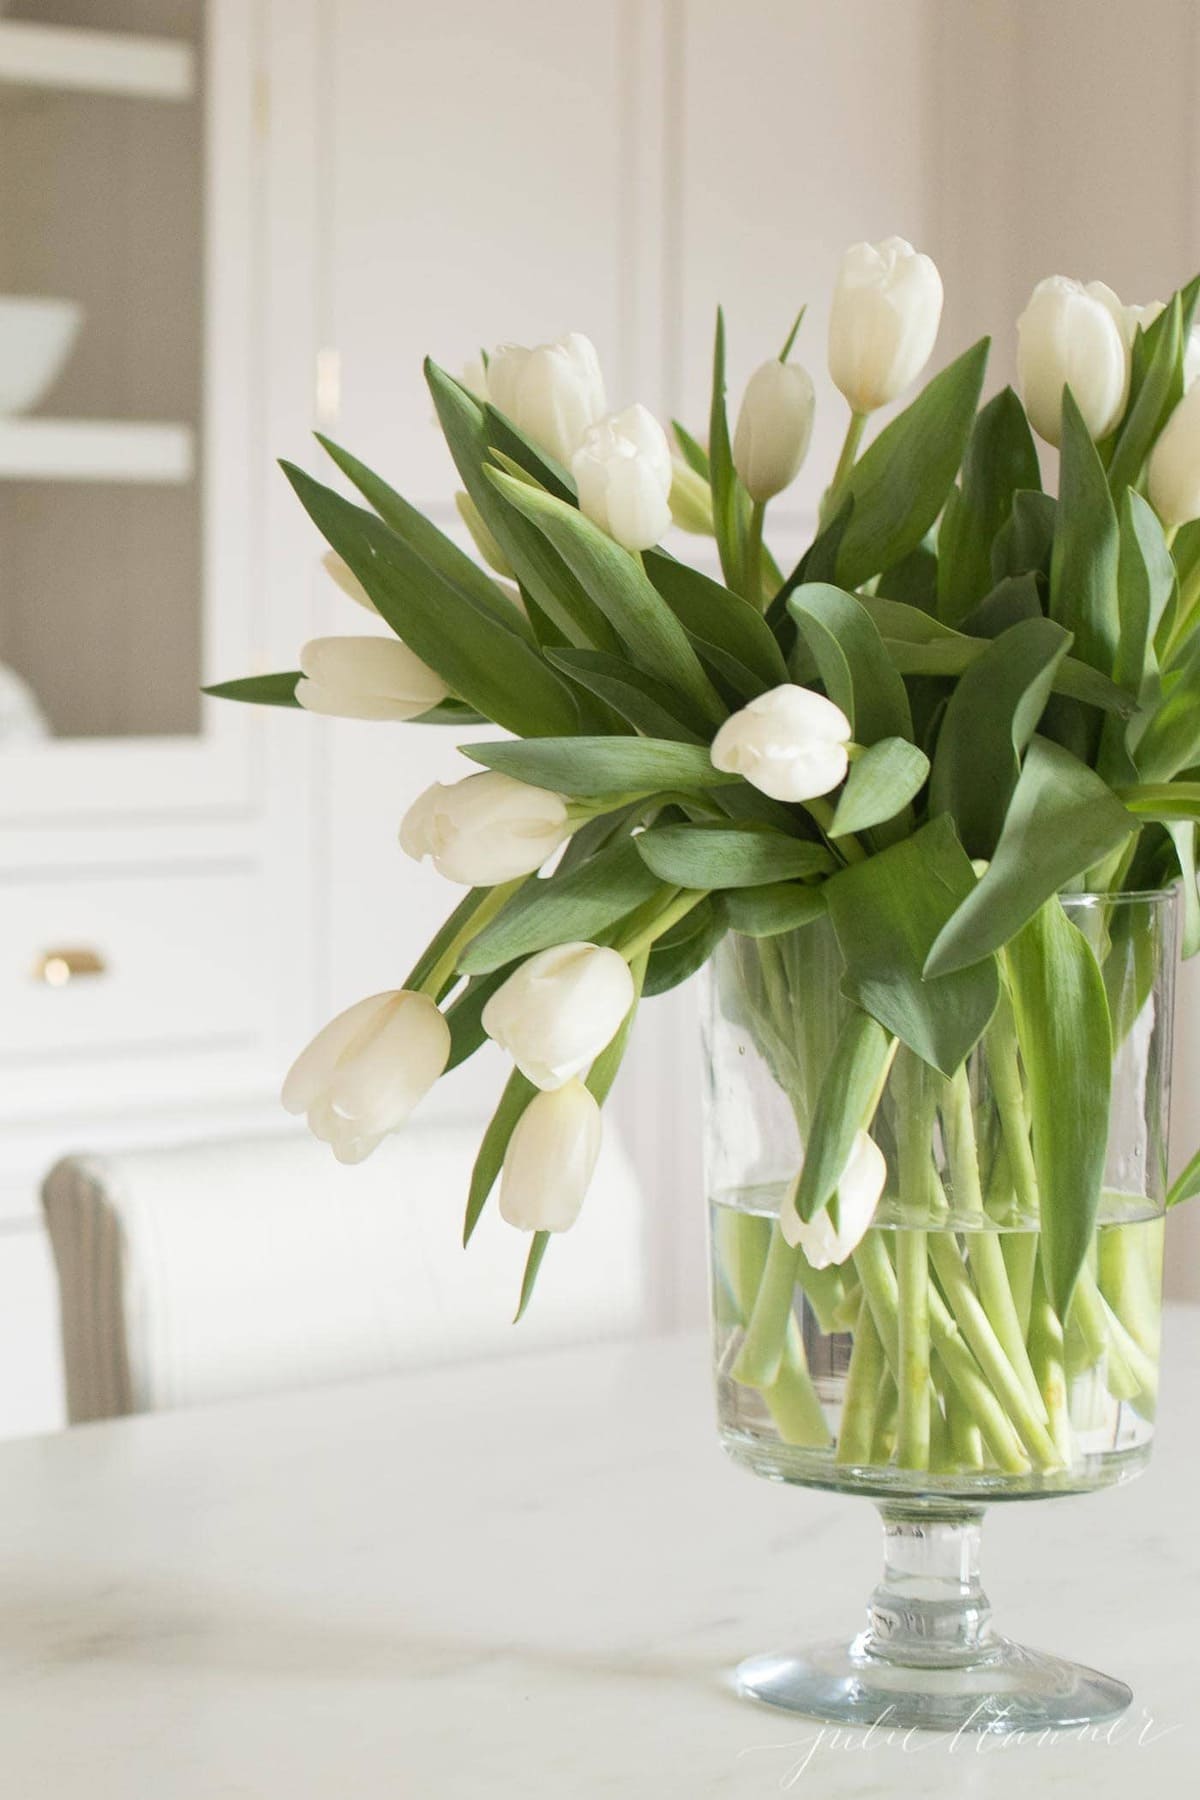 Tulips in a glass vase on a marble kitchen countertop. 